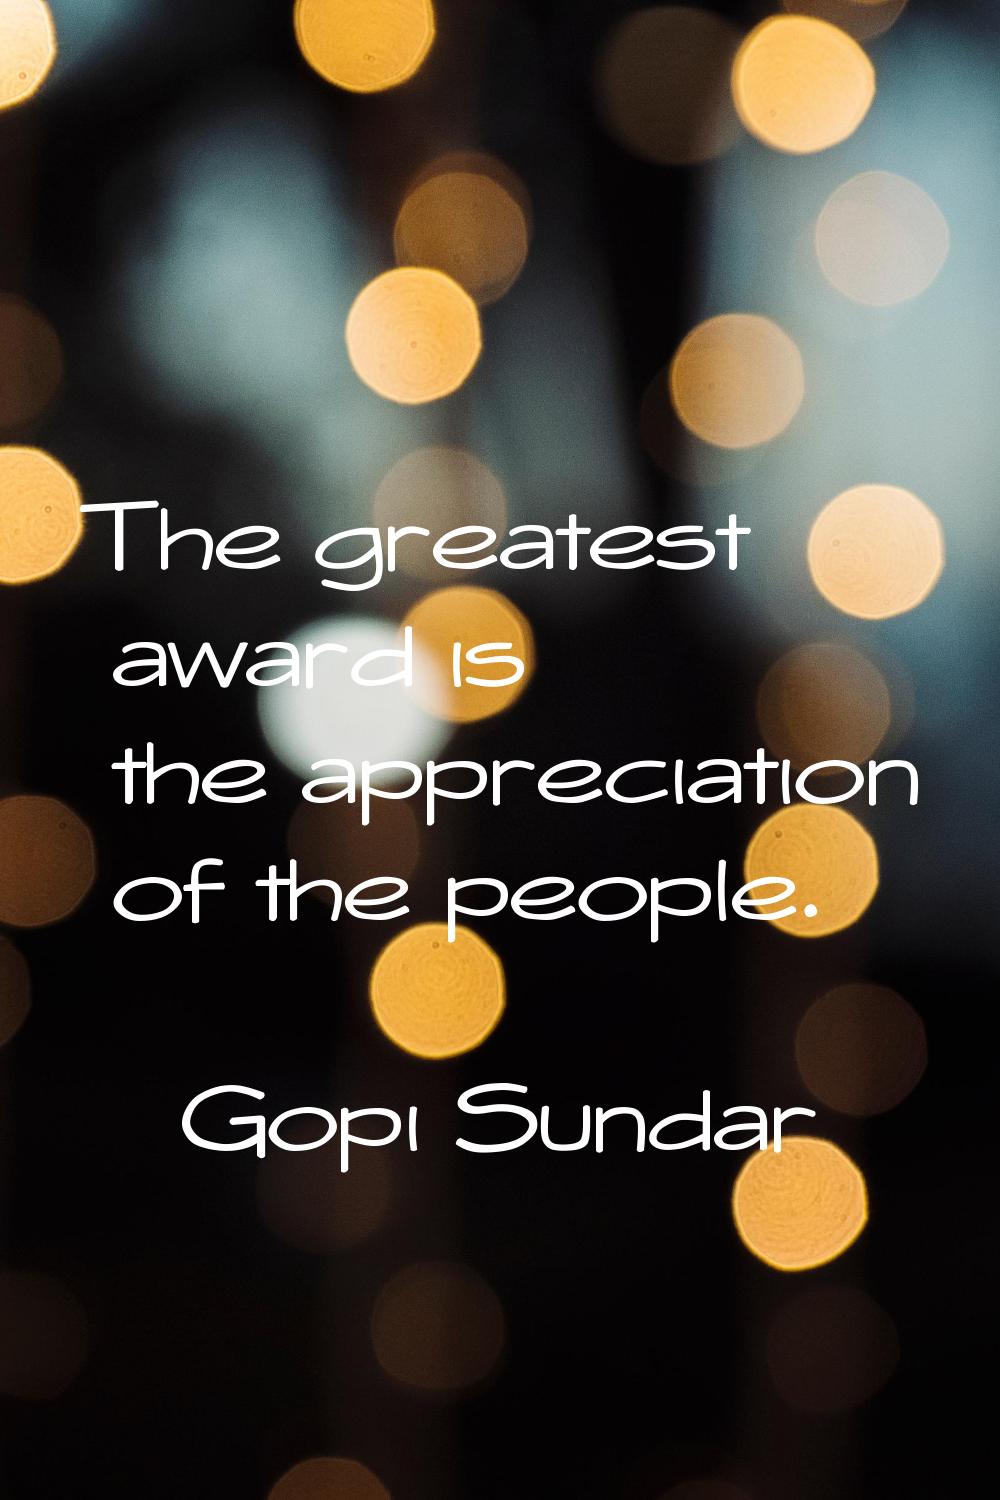 The greatest award is the appreciation of the people.